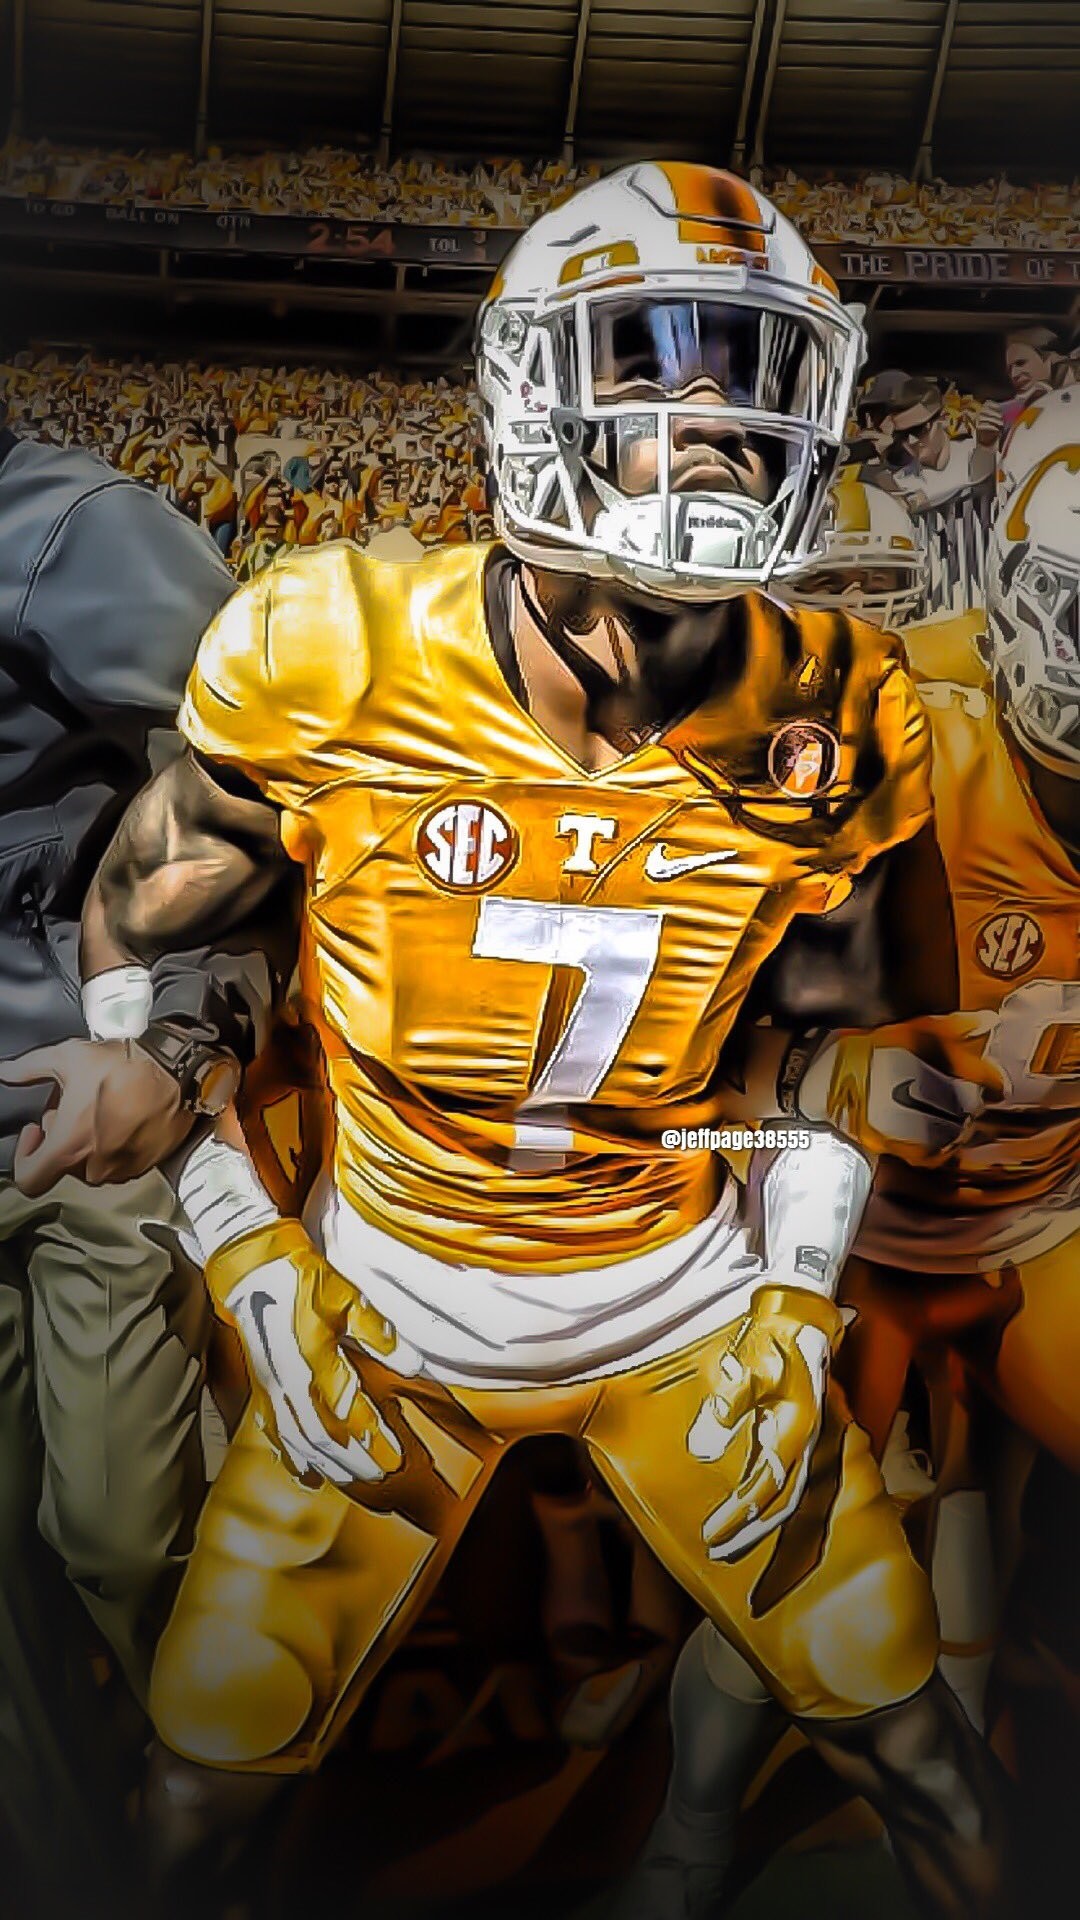 1080x1920 Jeff Page on Twitter: "Cam Sutton #WeComing wallpaper sized for iPhone 6+.  Use & RT if you like. #OrangeSwarm #Team120 #25points Go #Vols! ...